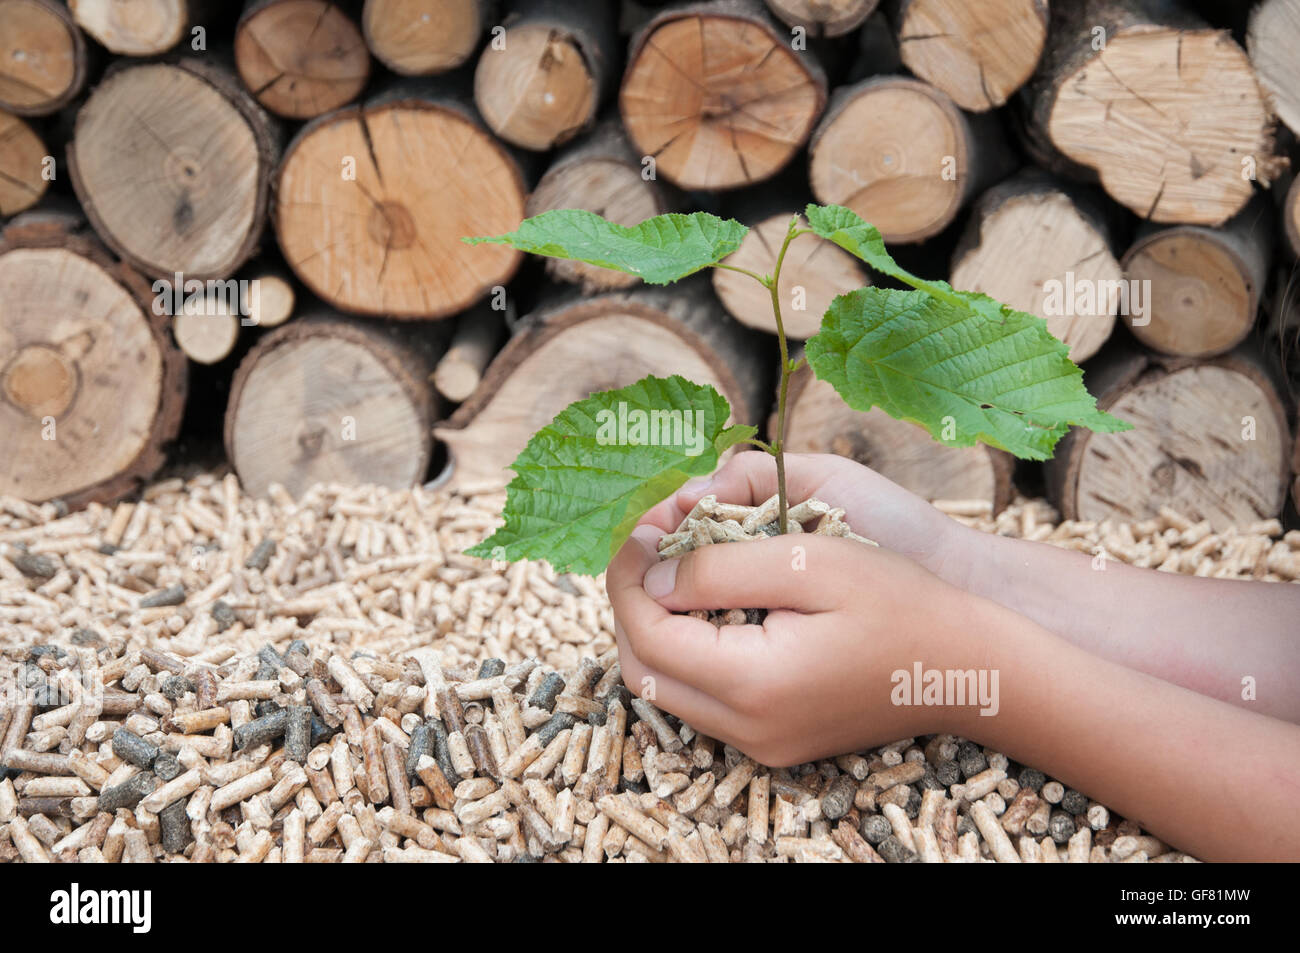 Childs hands protect a young tree  in pellets Stock Photo